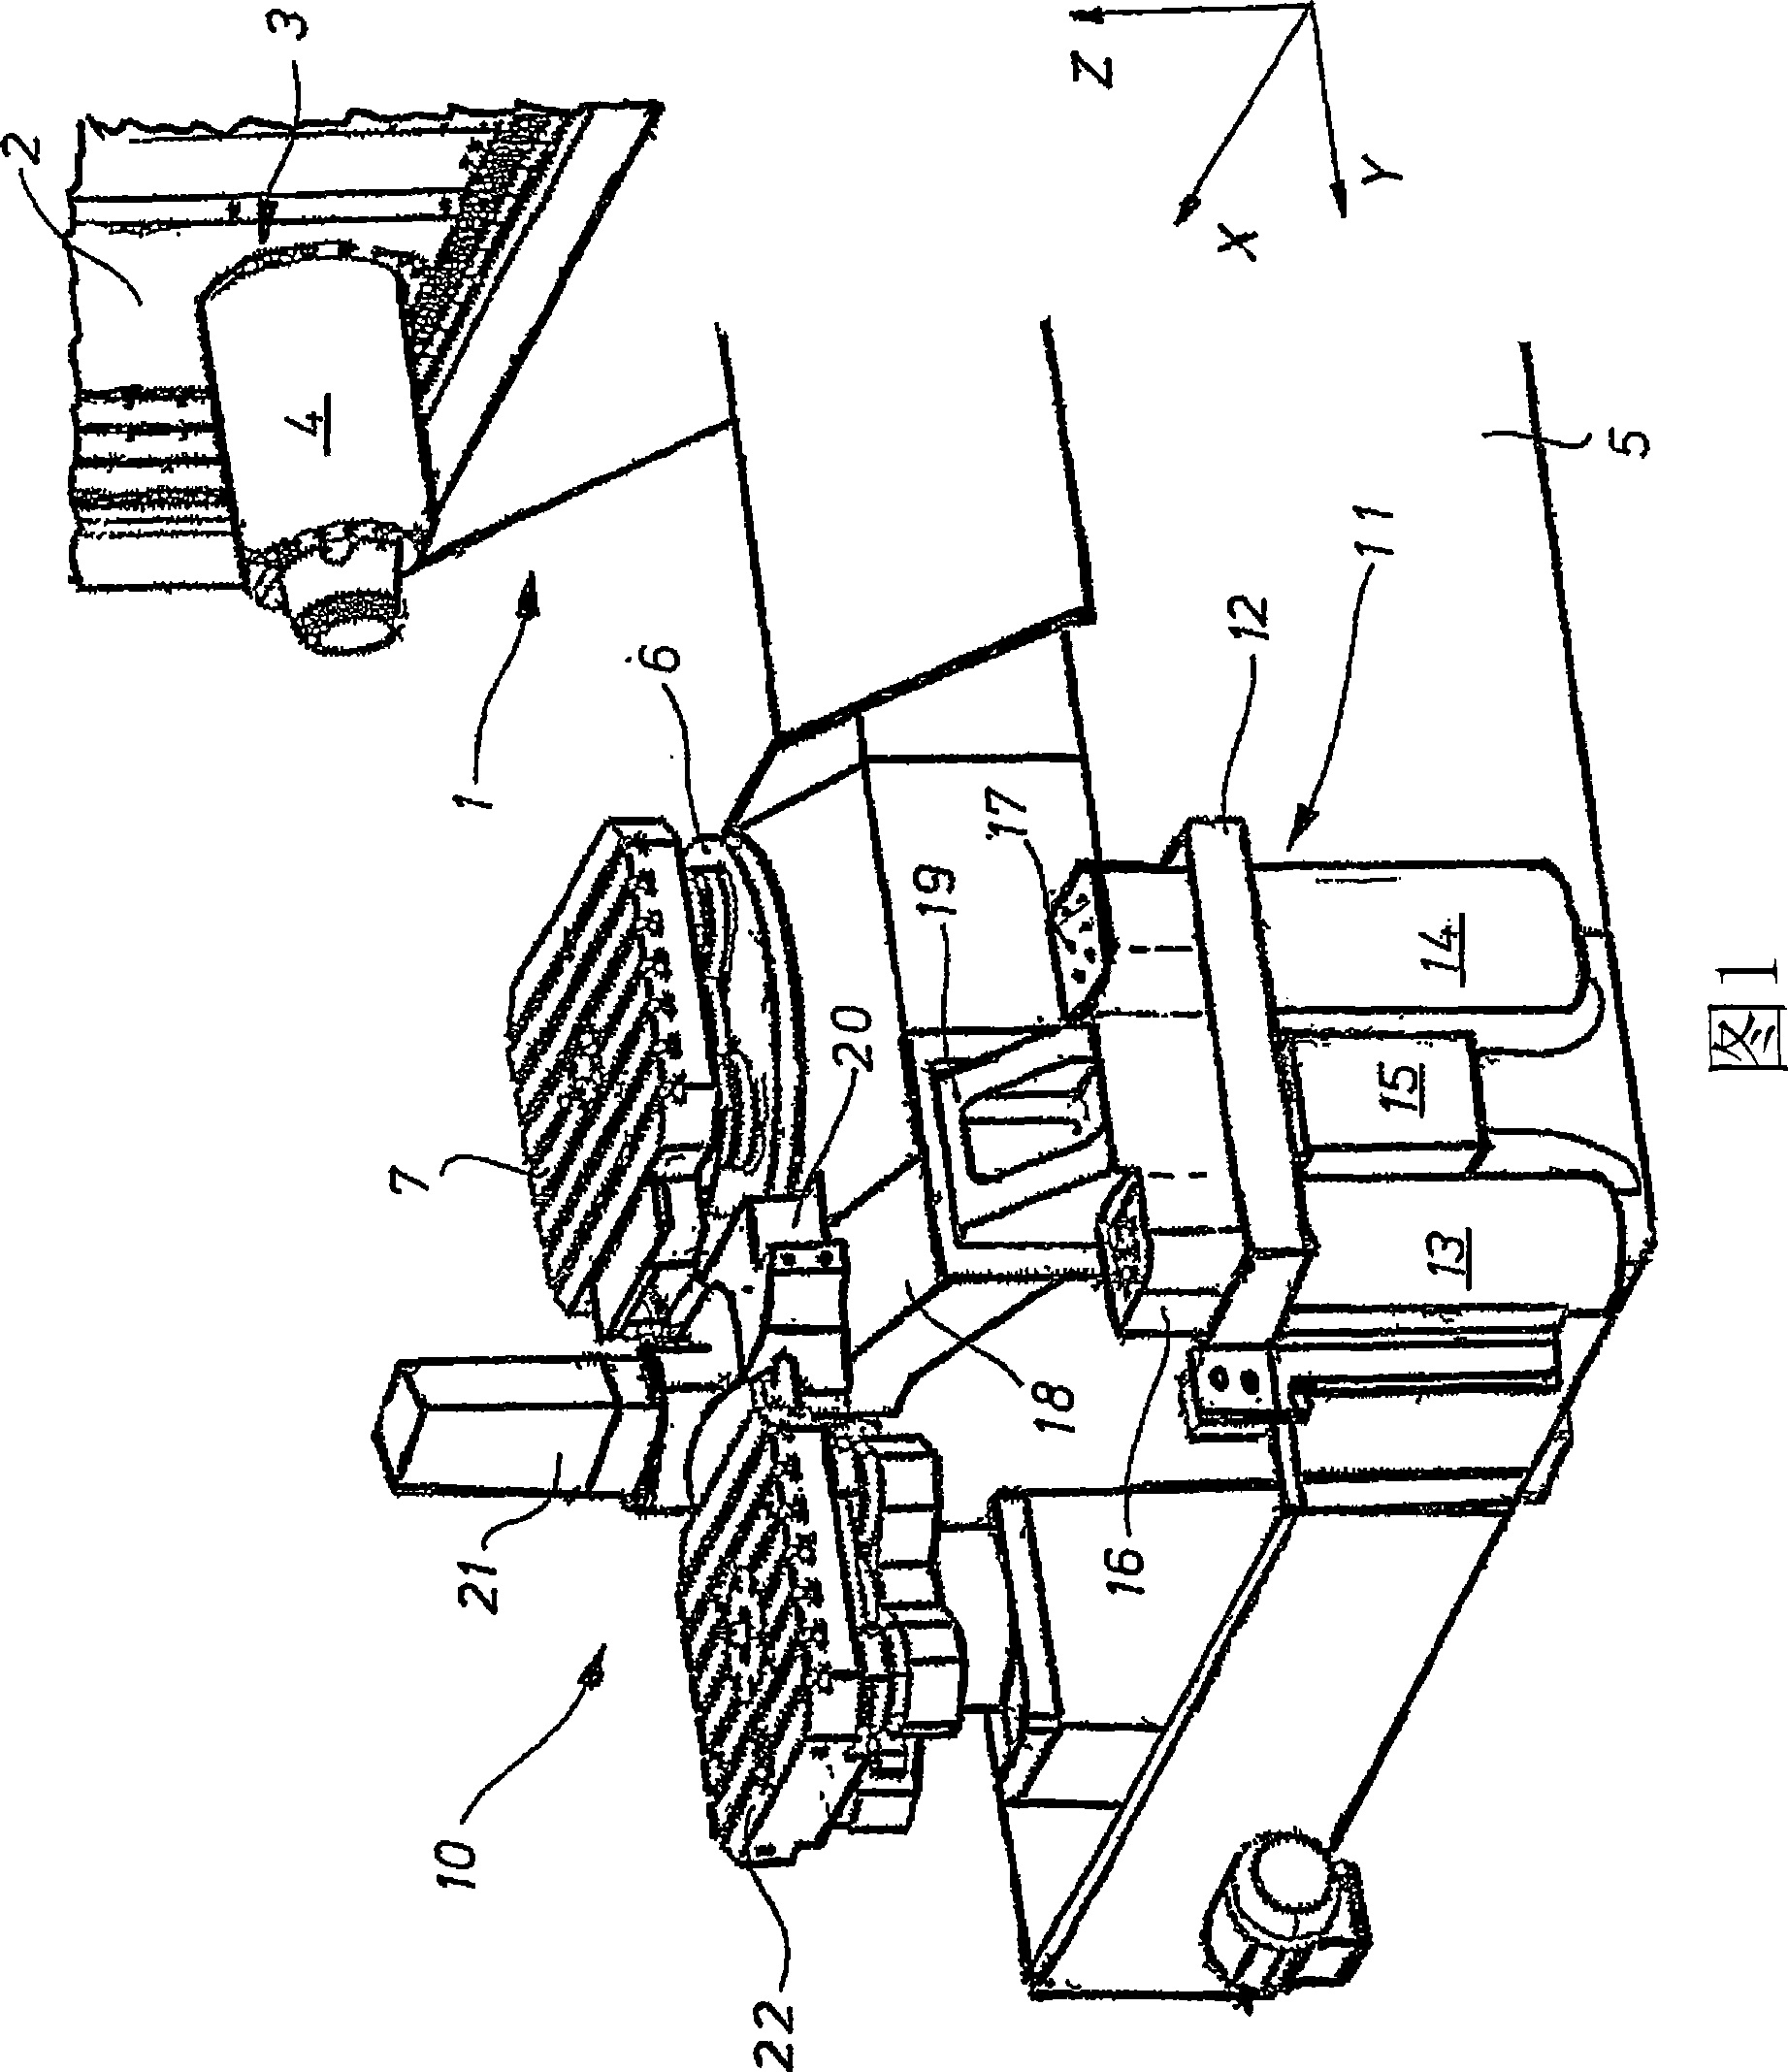 Milling and drilling machine comprising a pallet exchanger